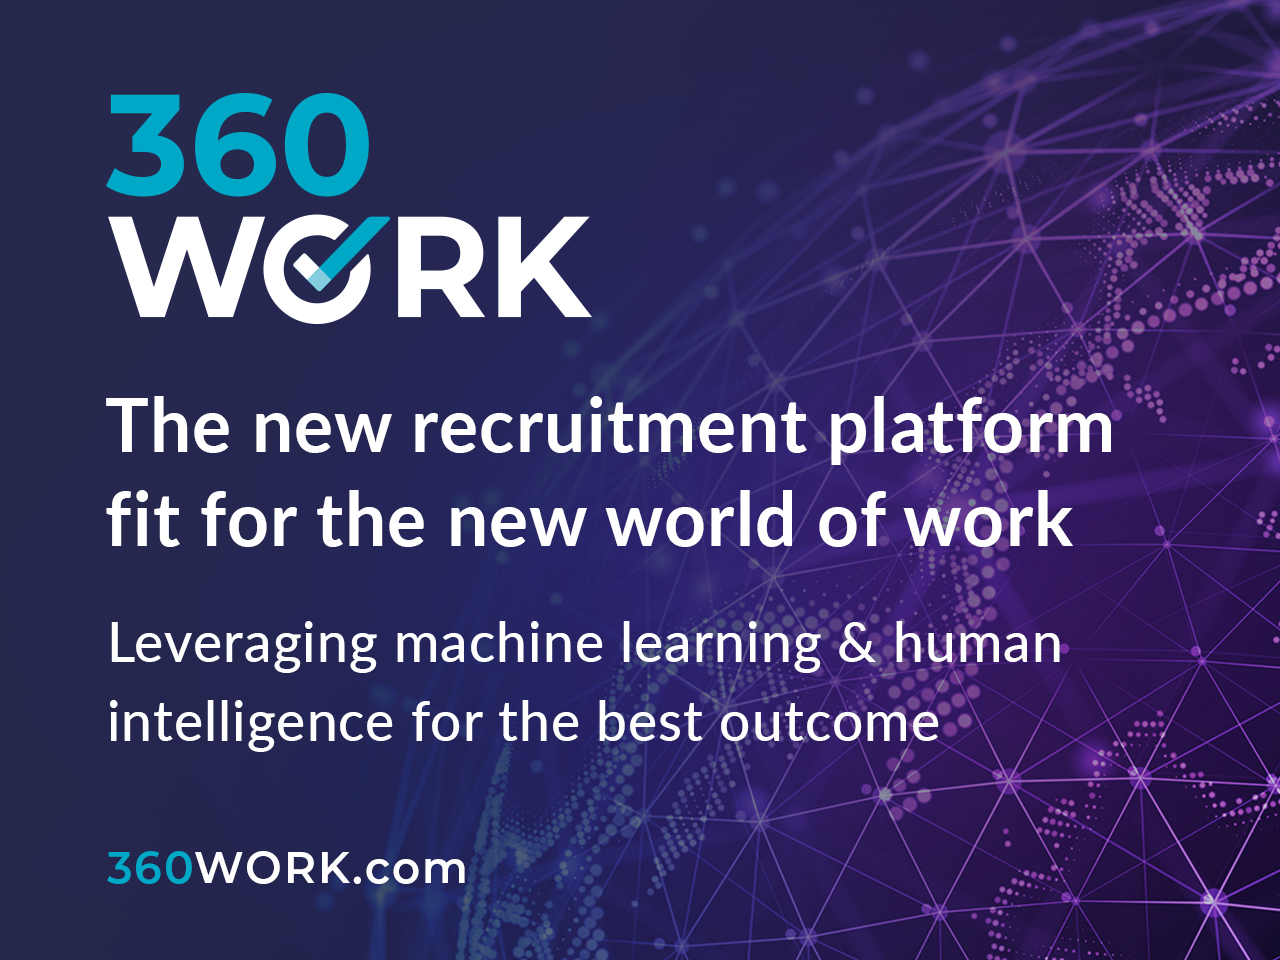 360WORK – The new recruitment platform fit for the new world of work